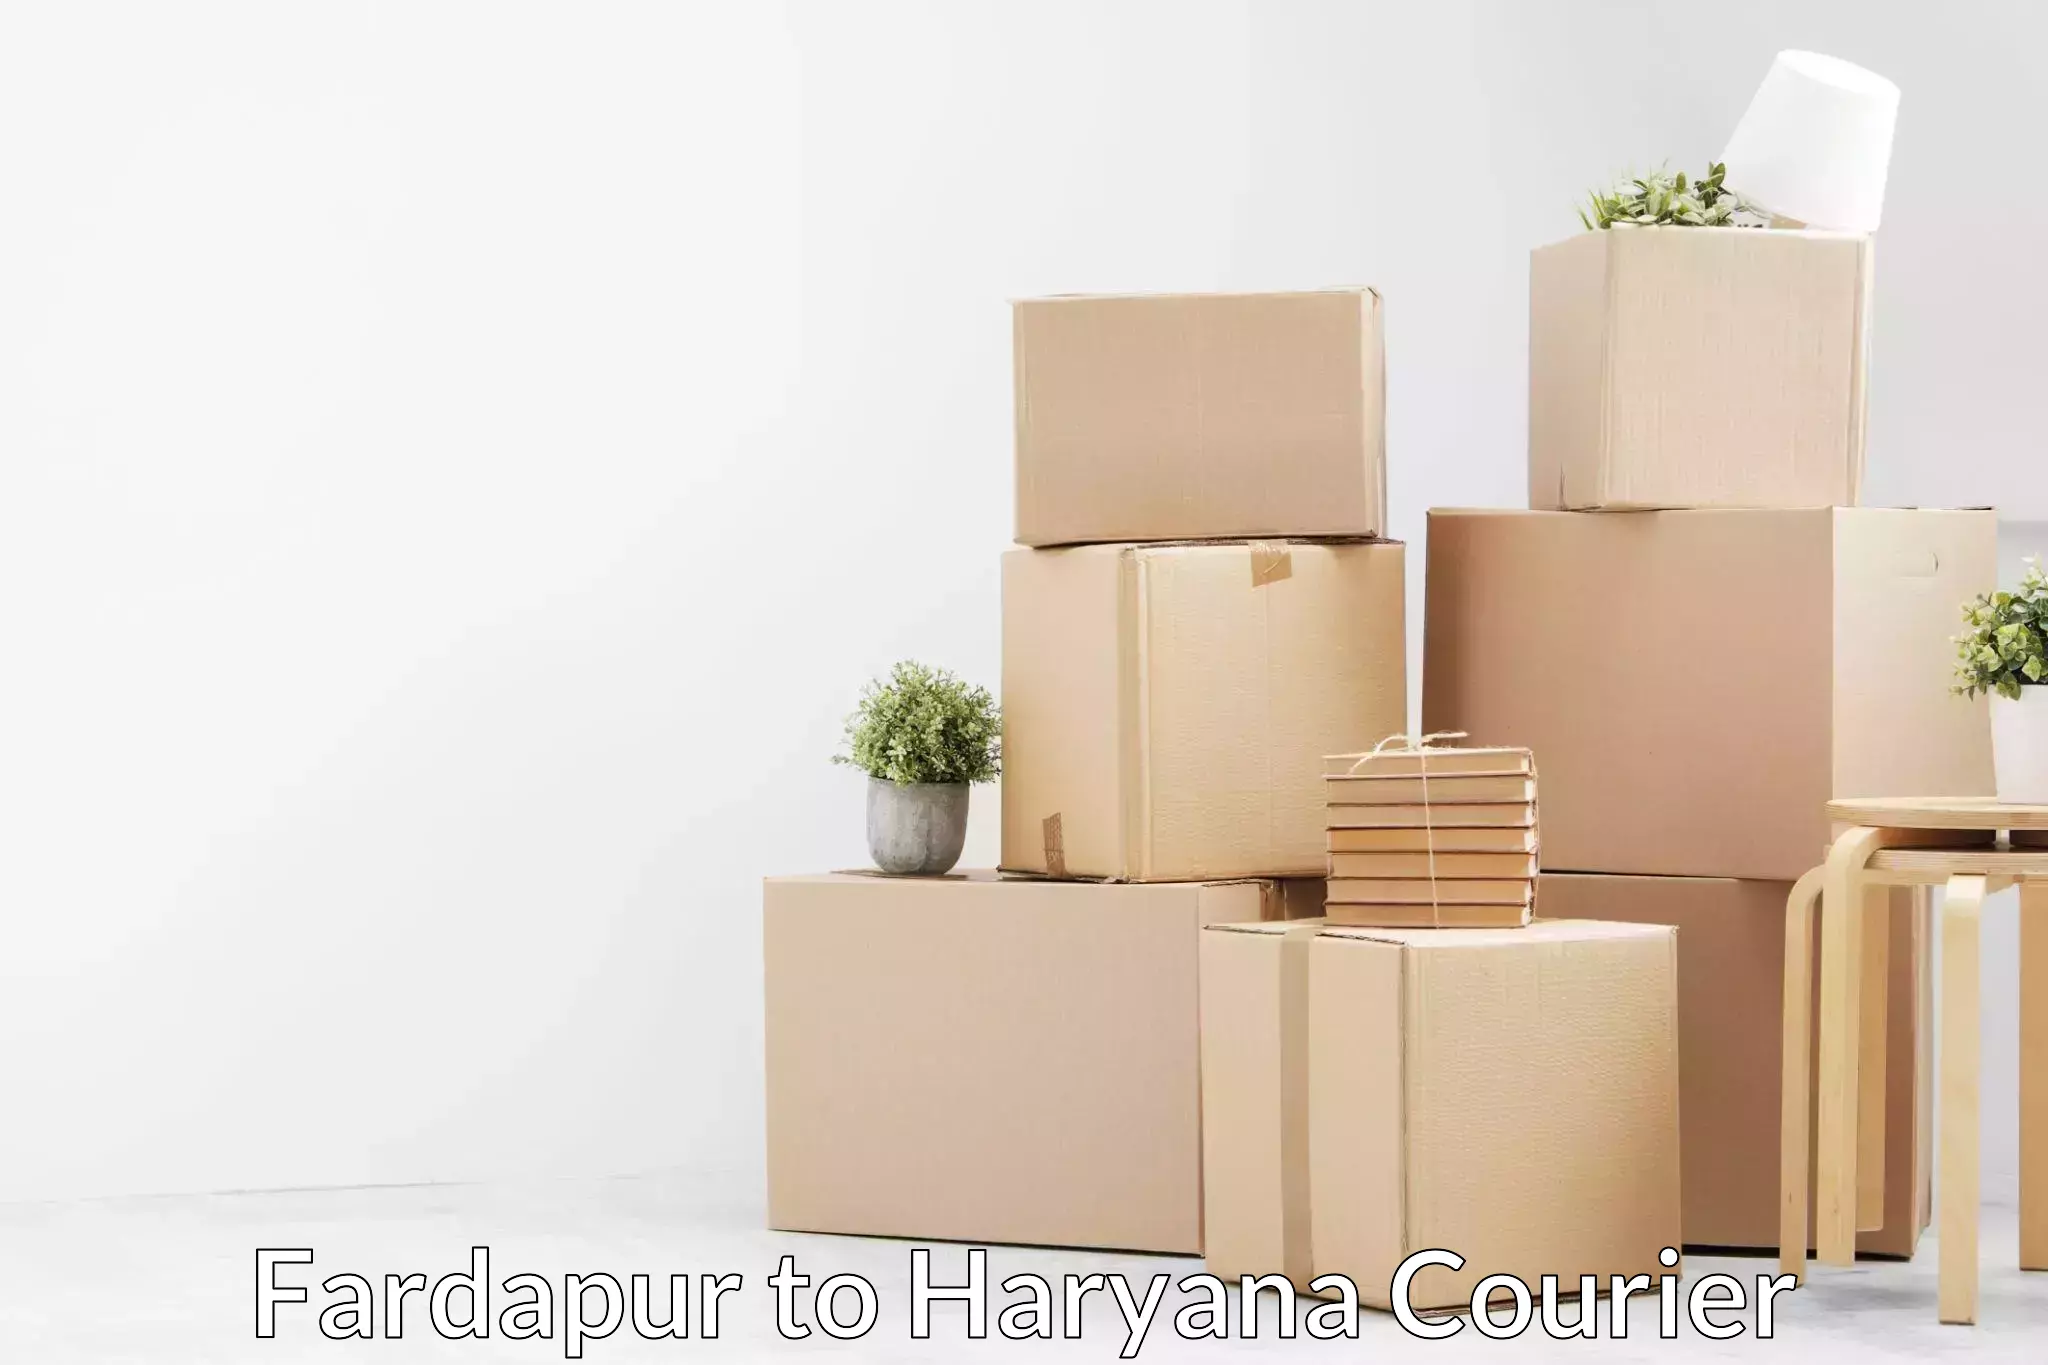 Professional moving company Fardapur to Assandh